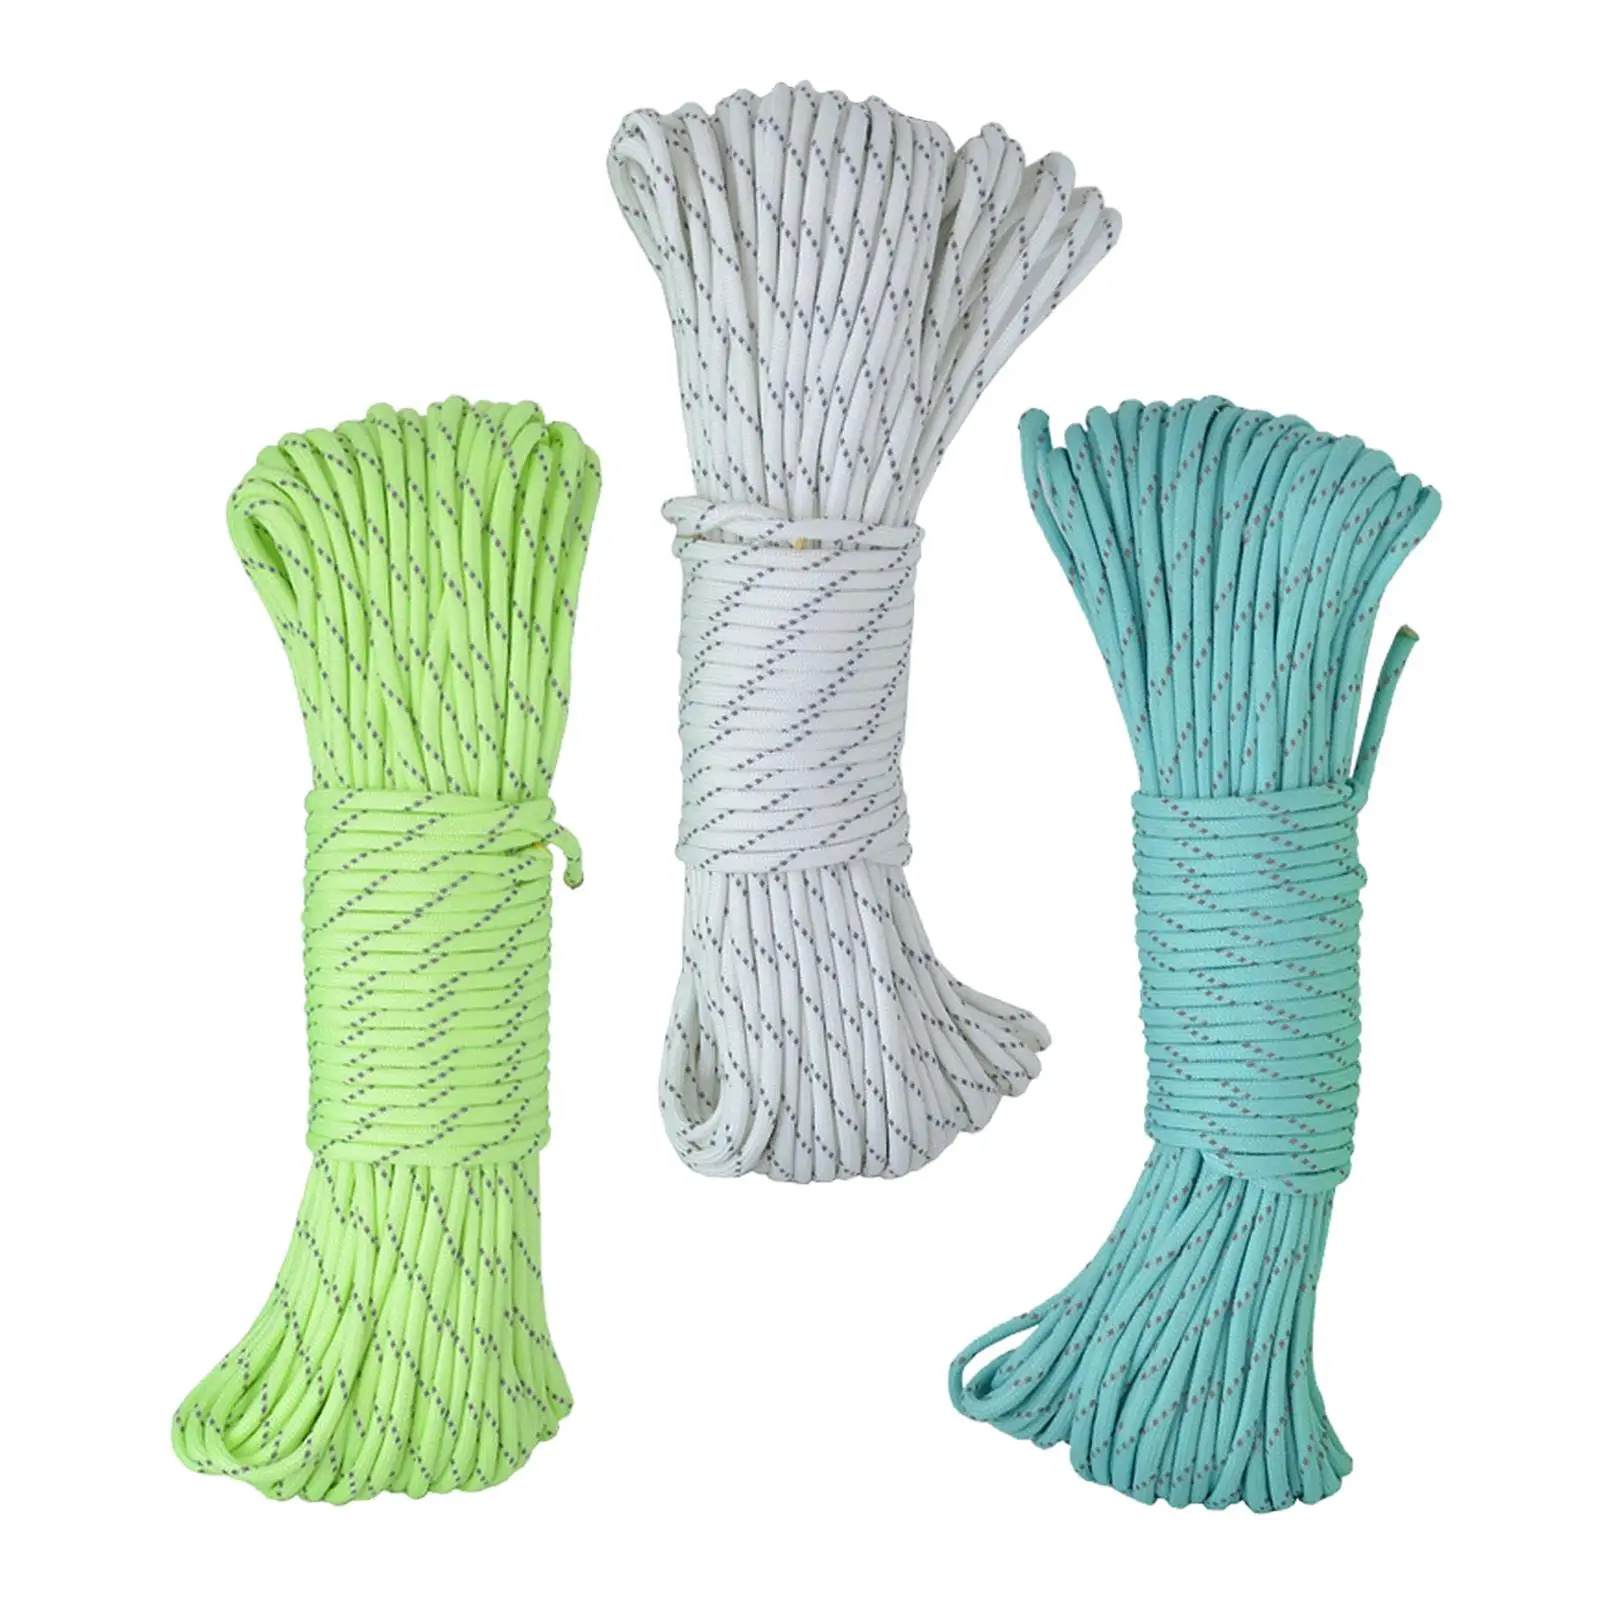 Parachute Cord 101 ft Outdoor Luminous Rope Tent Camping Rope Tent Cord for Bracelet Braiding Tent Camping Hiking Accessories